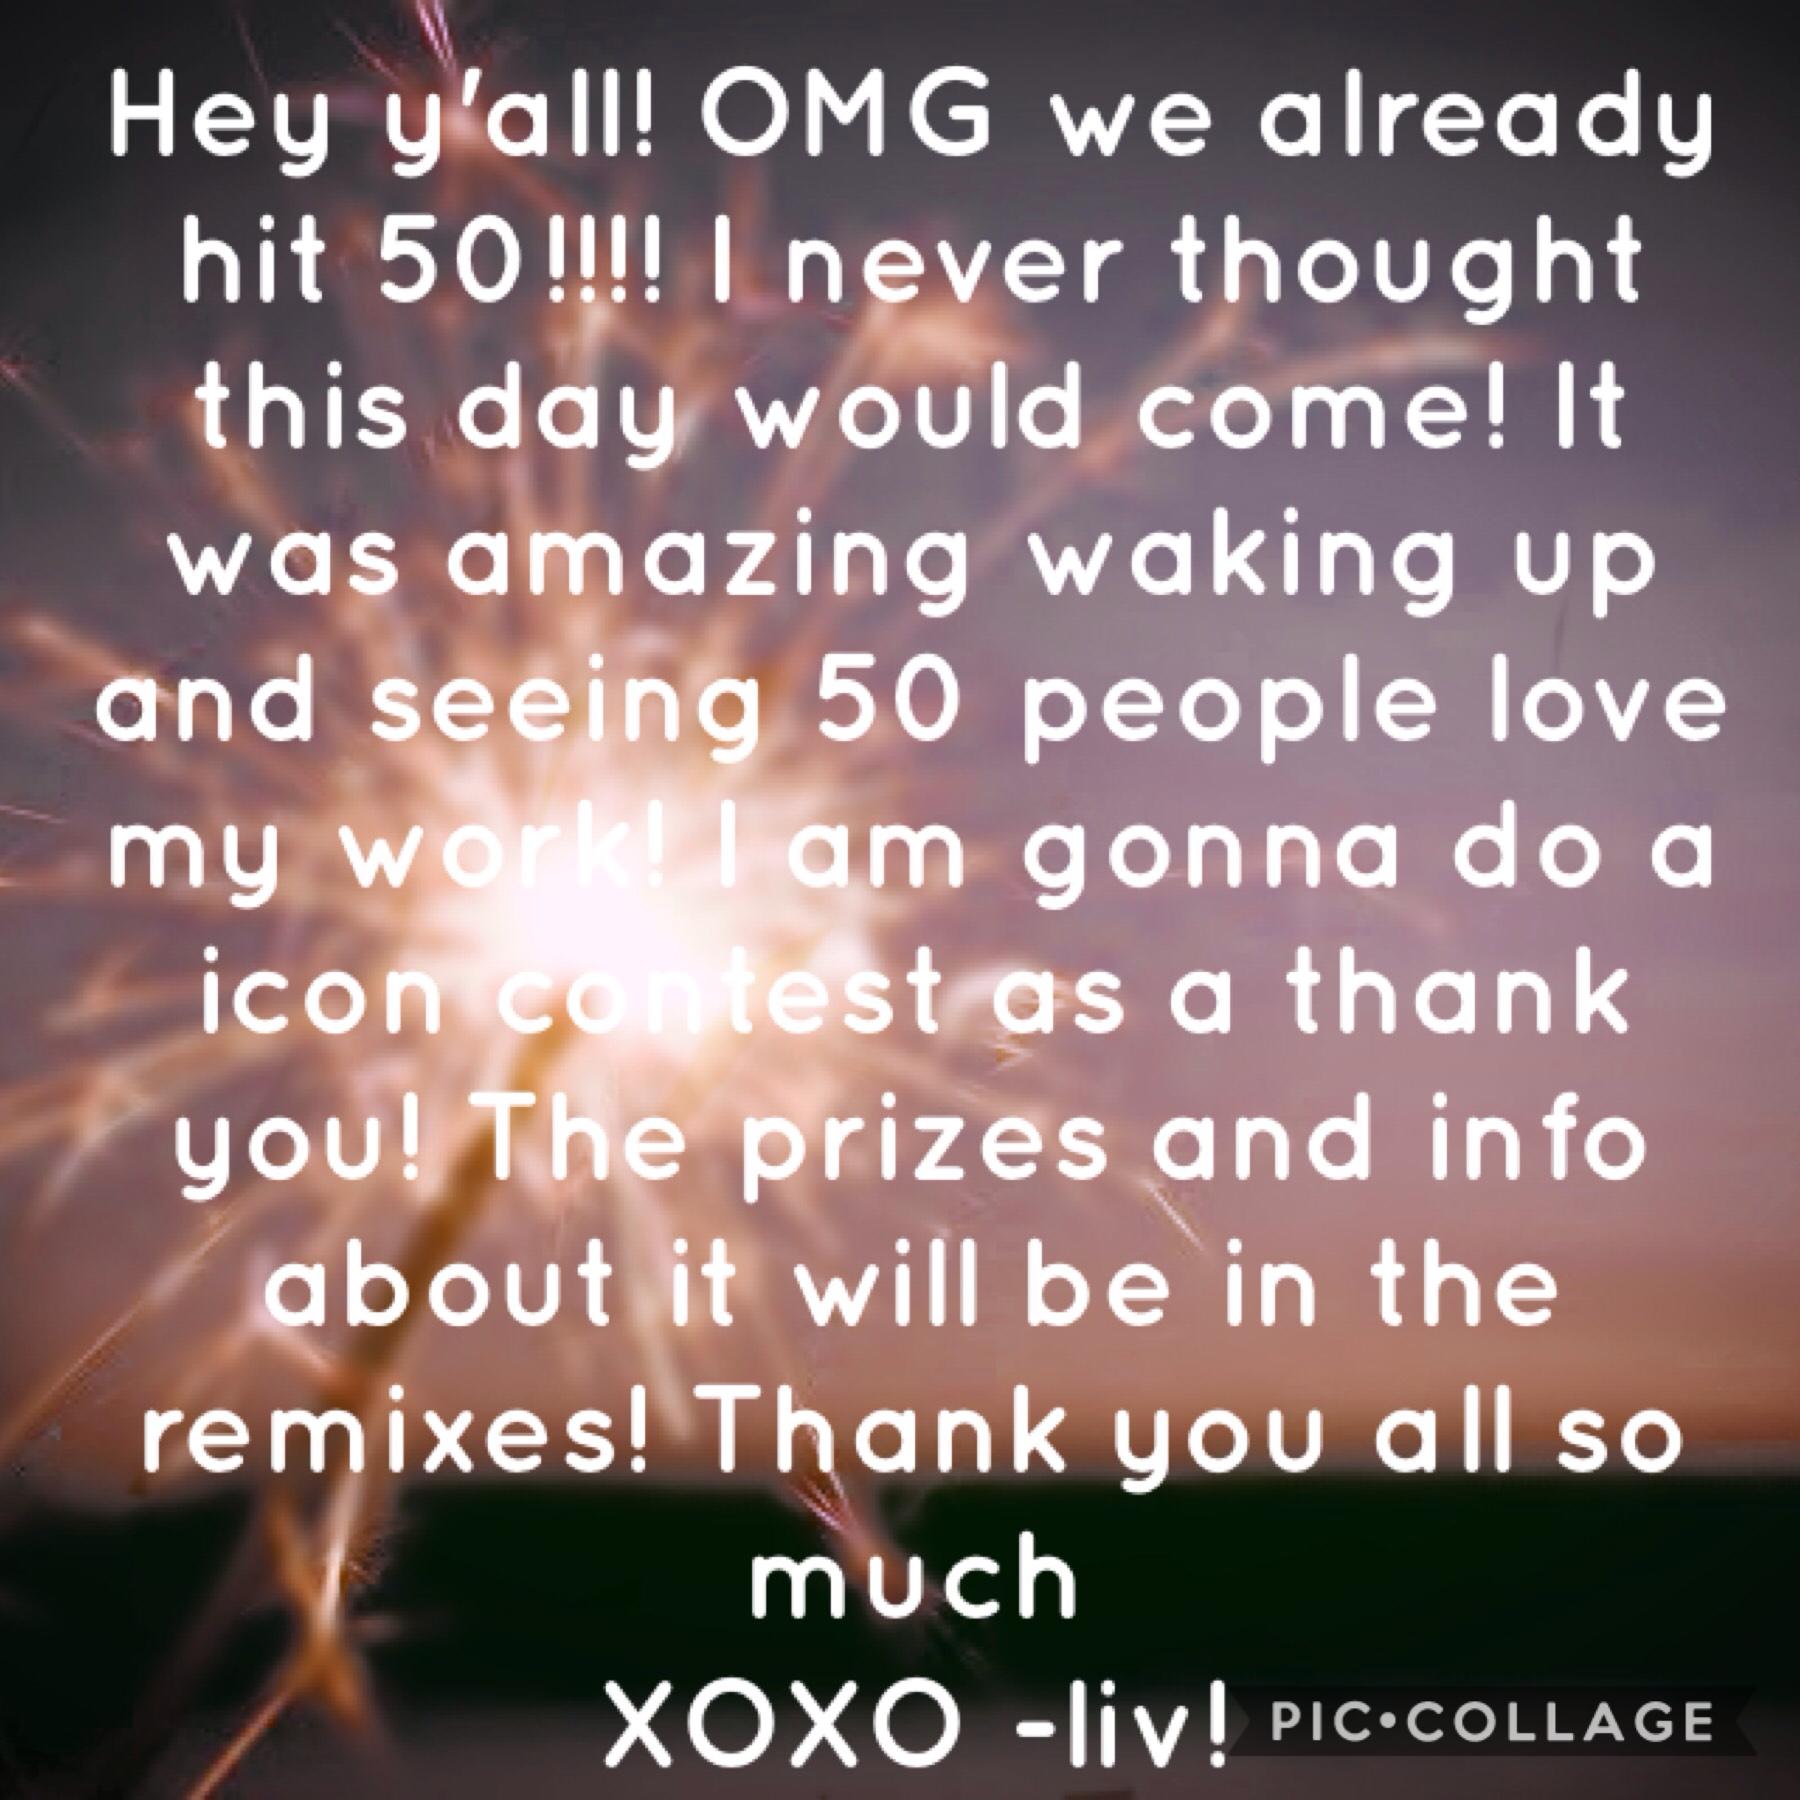 A Huge thank you to y'all from me! Get ready for the icon contest!🤗thanks again loves